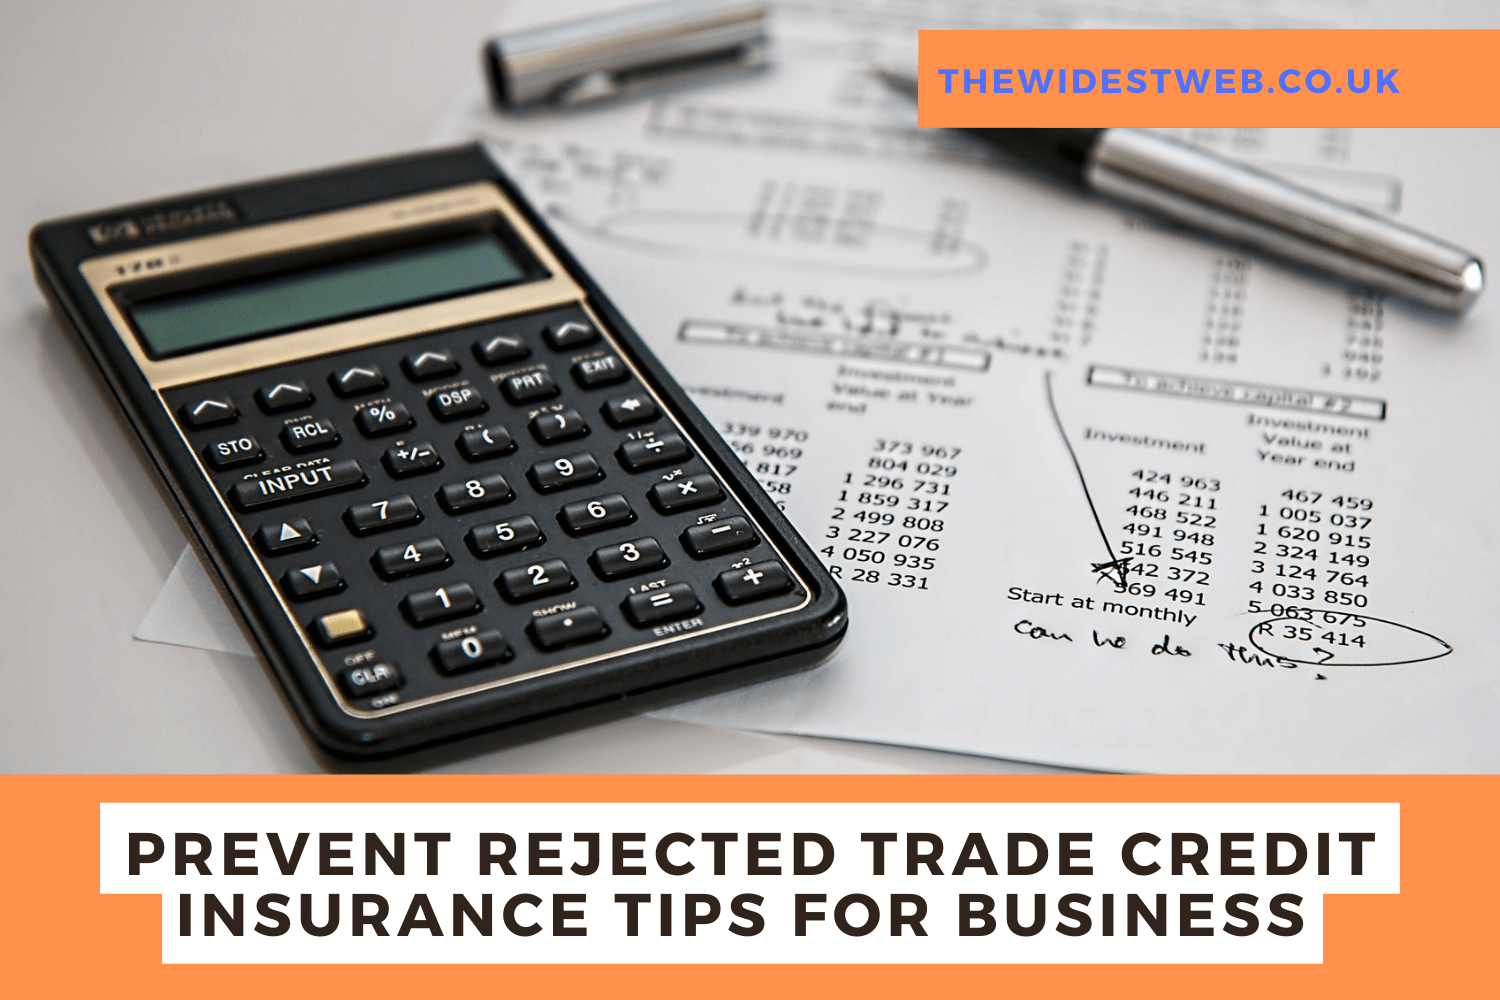 How To Prevent Rejected Or Reduced Trade Credit Insurance for Businesses?